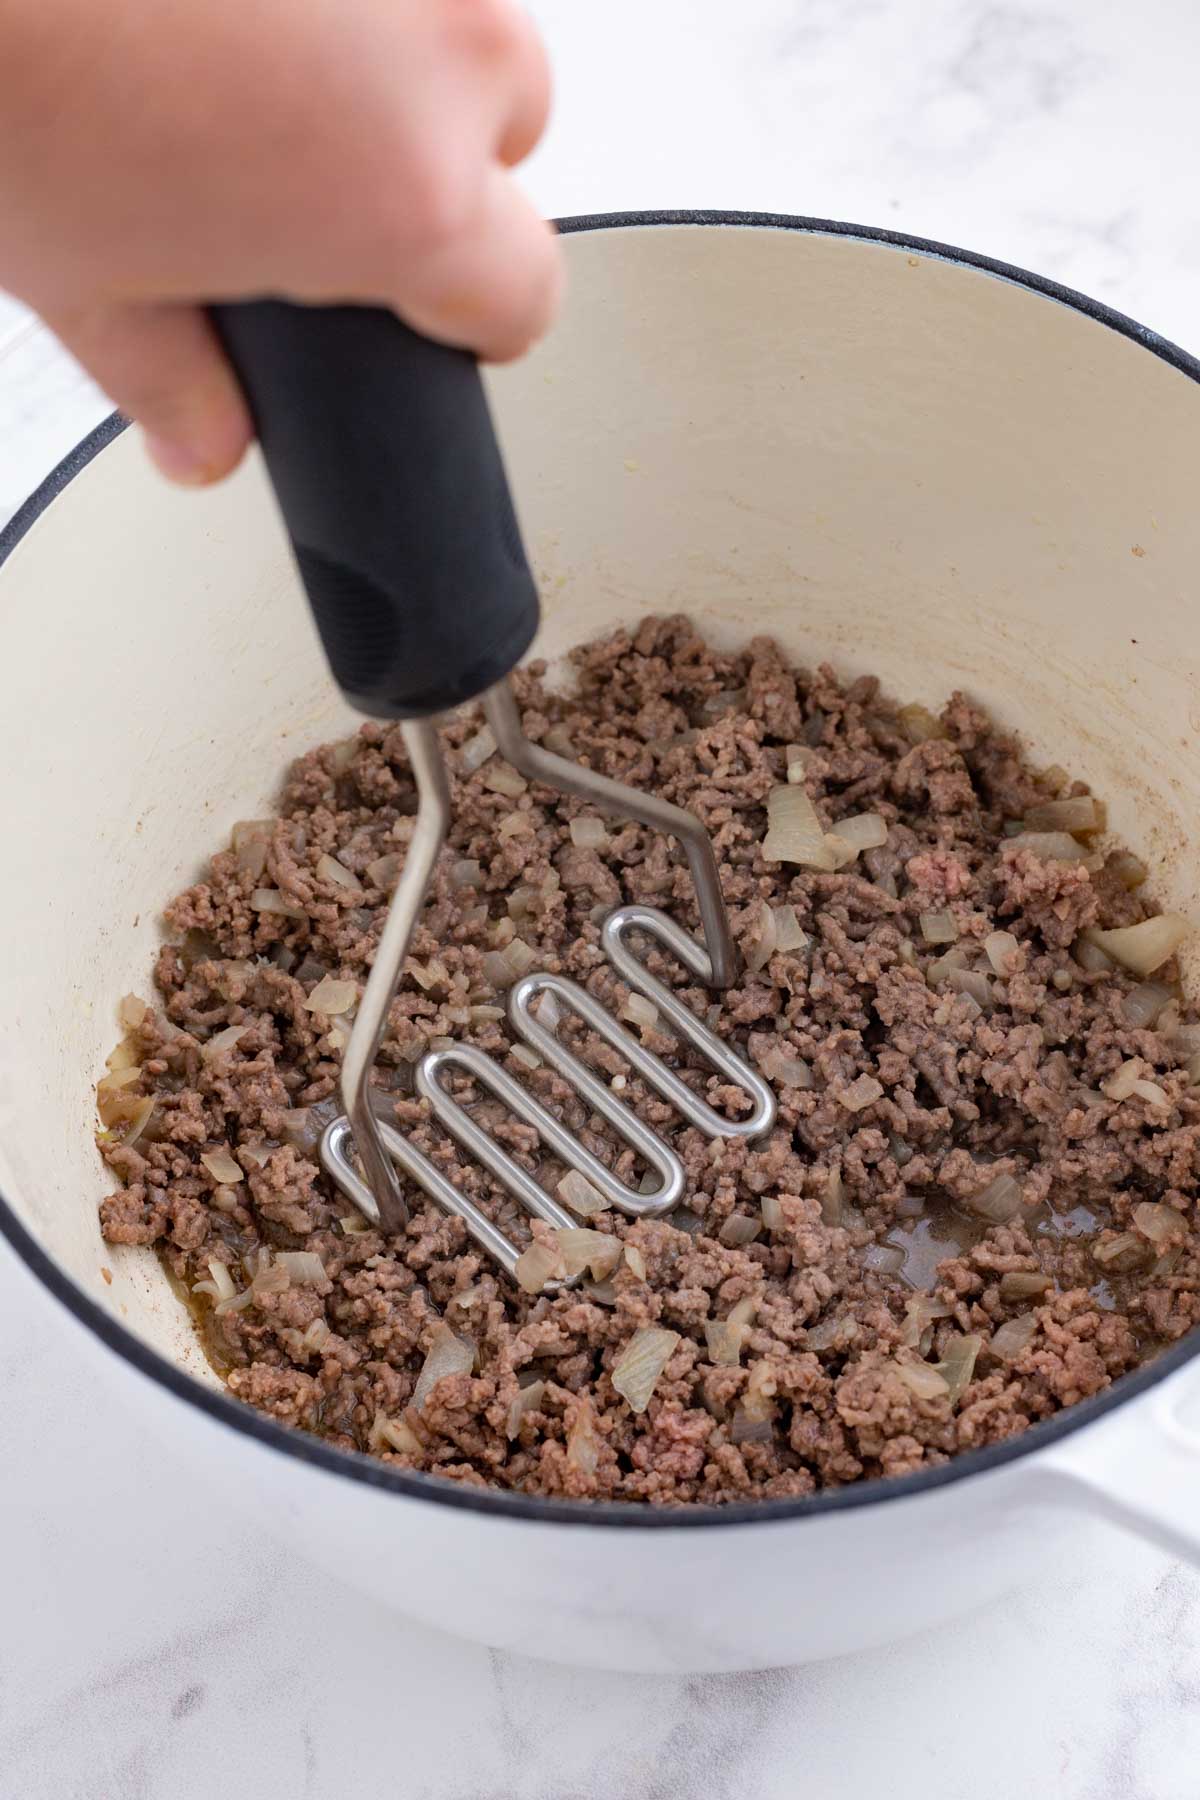 A meat masher crumbles the browned meat.